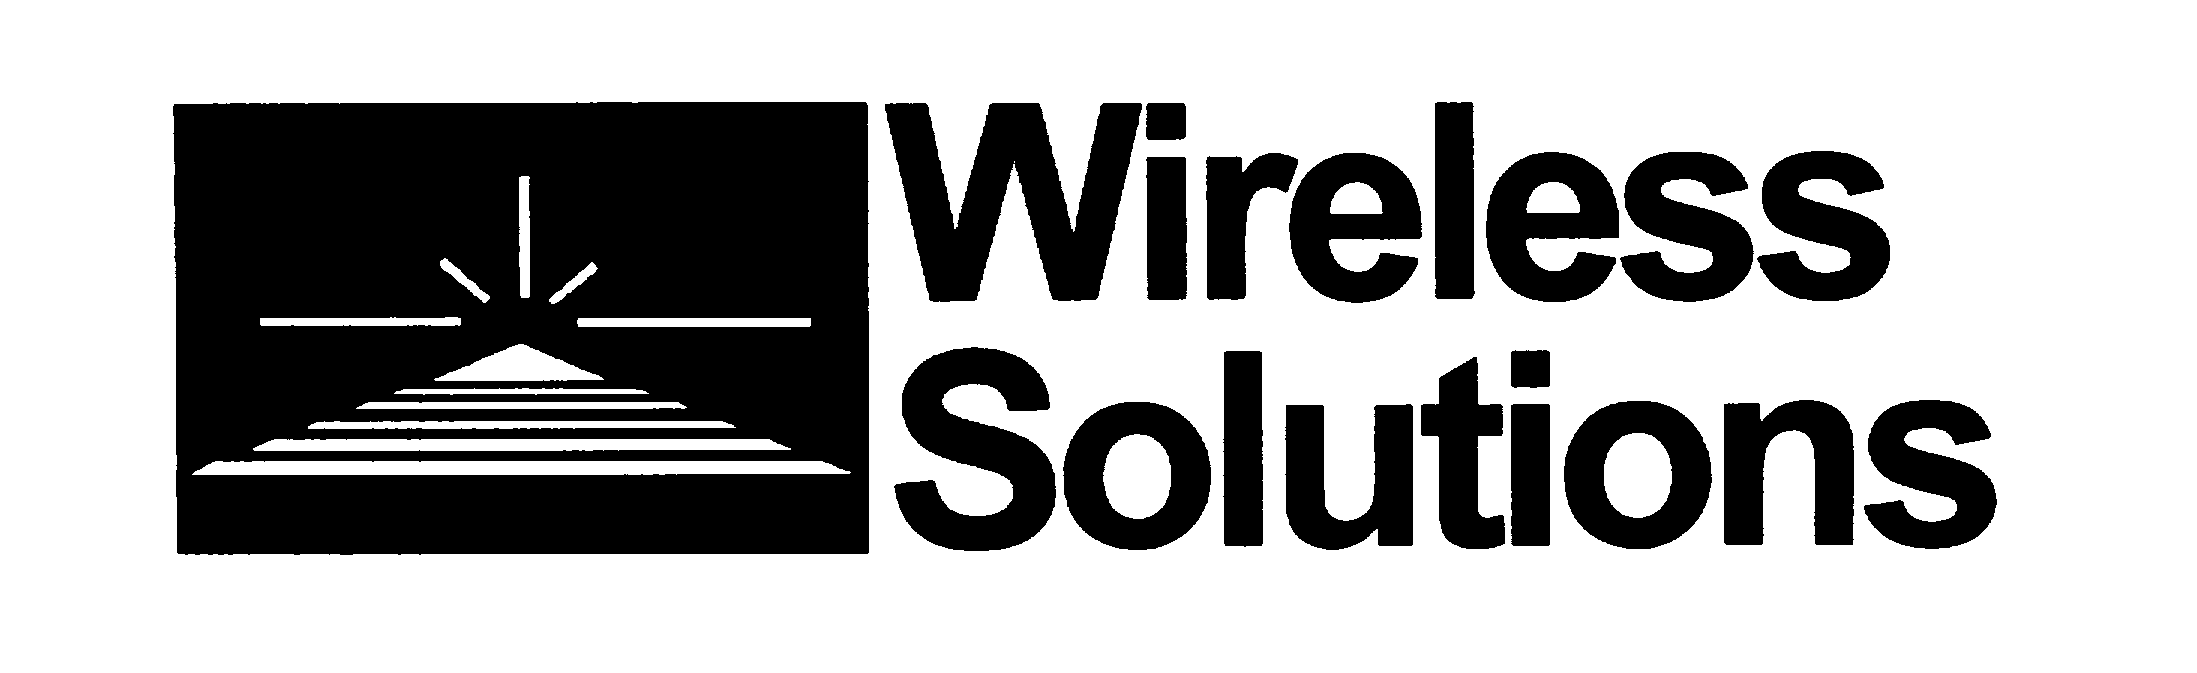 WIRELESS SOLUTIONS